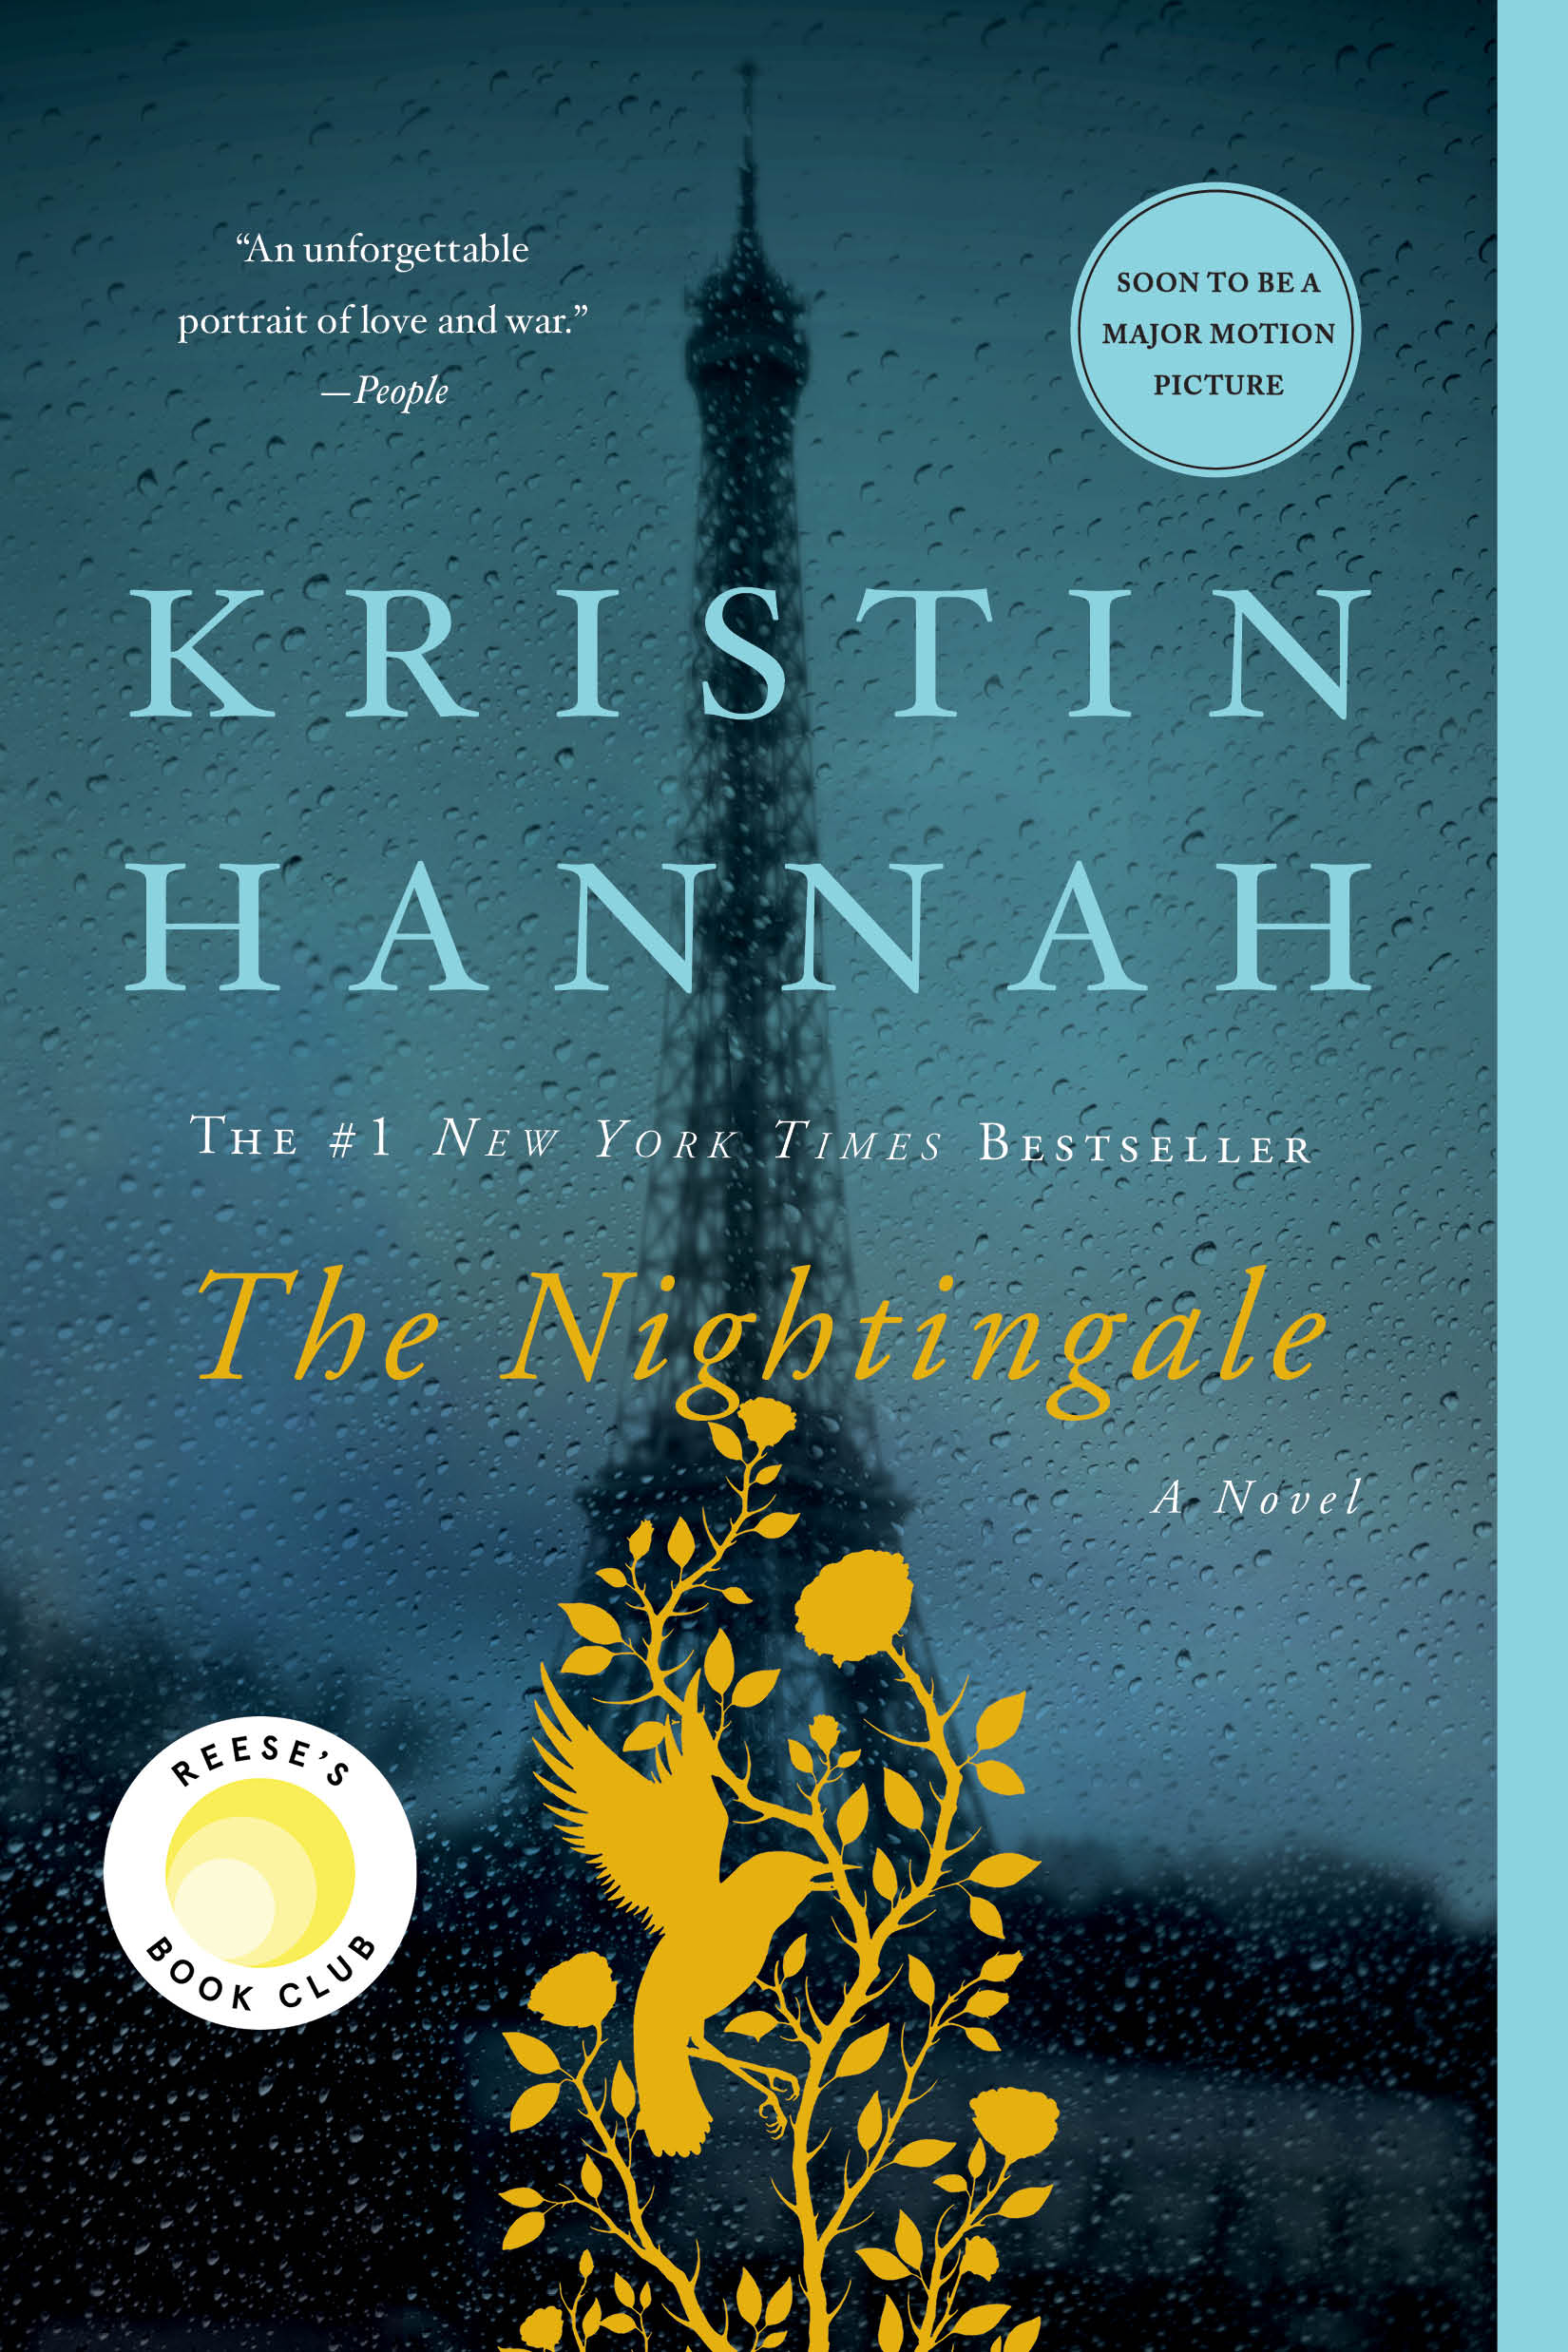 One of our recommended books is The Nightingale by Kristin Hannah